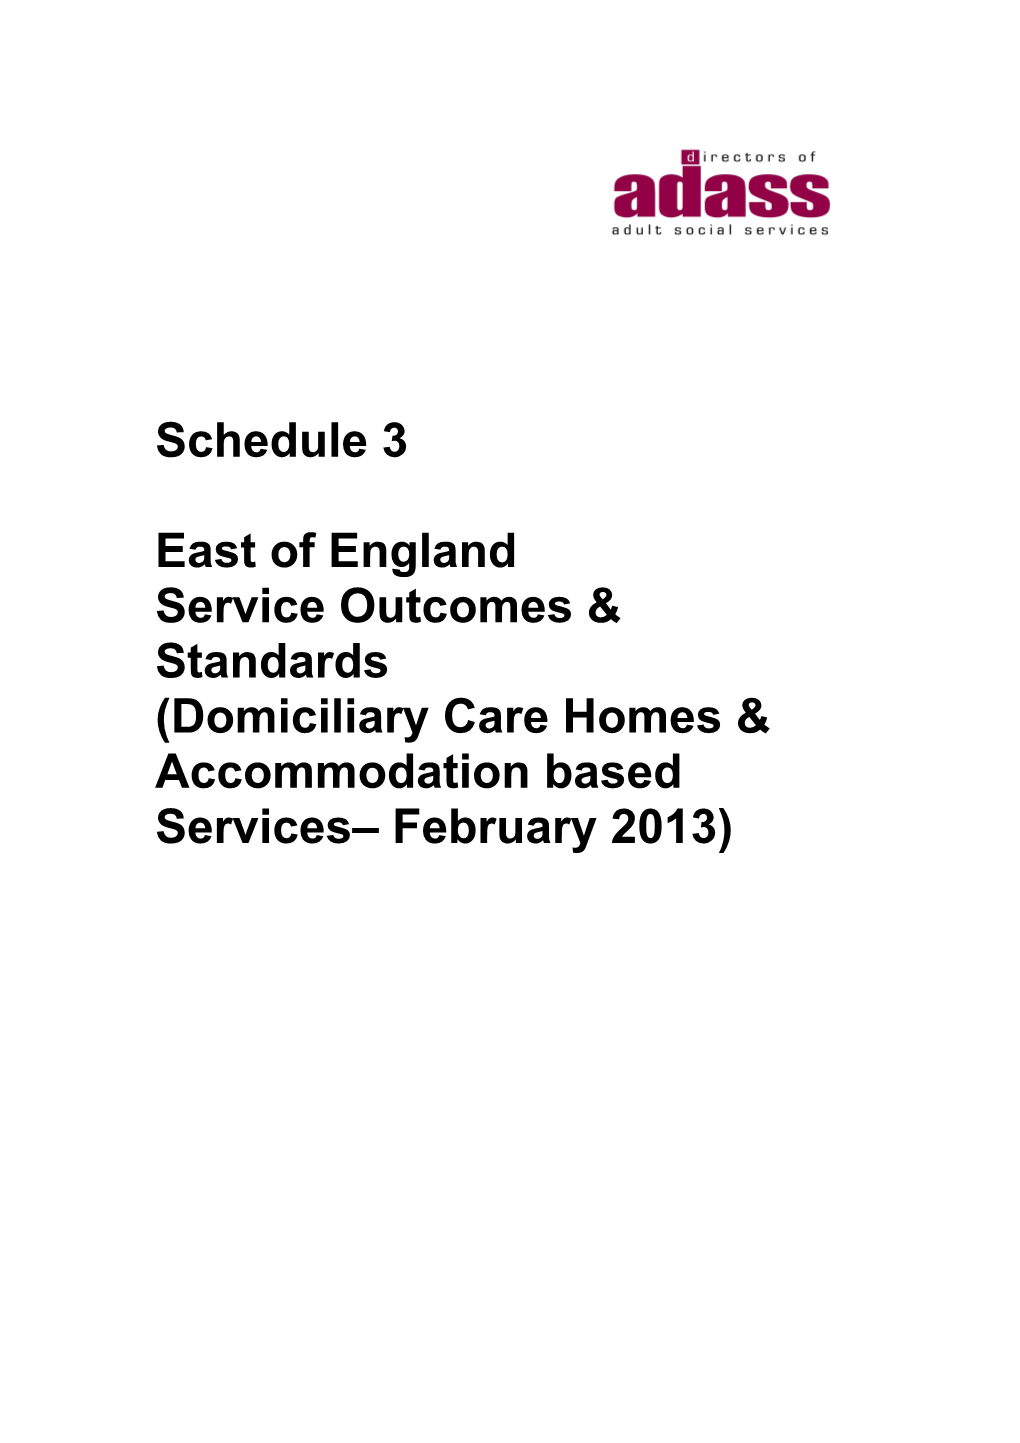 East of England Service Outcomes and Standards of Care (Domiciliary Care, Care Homes